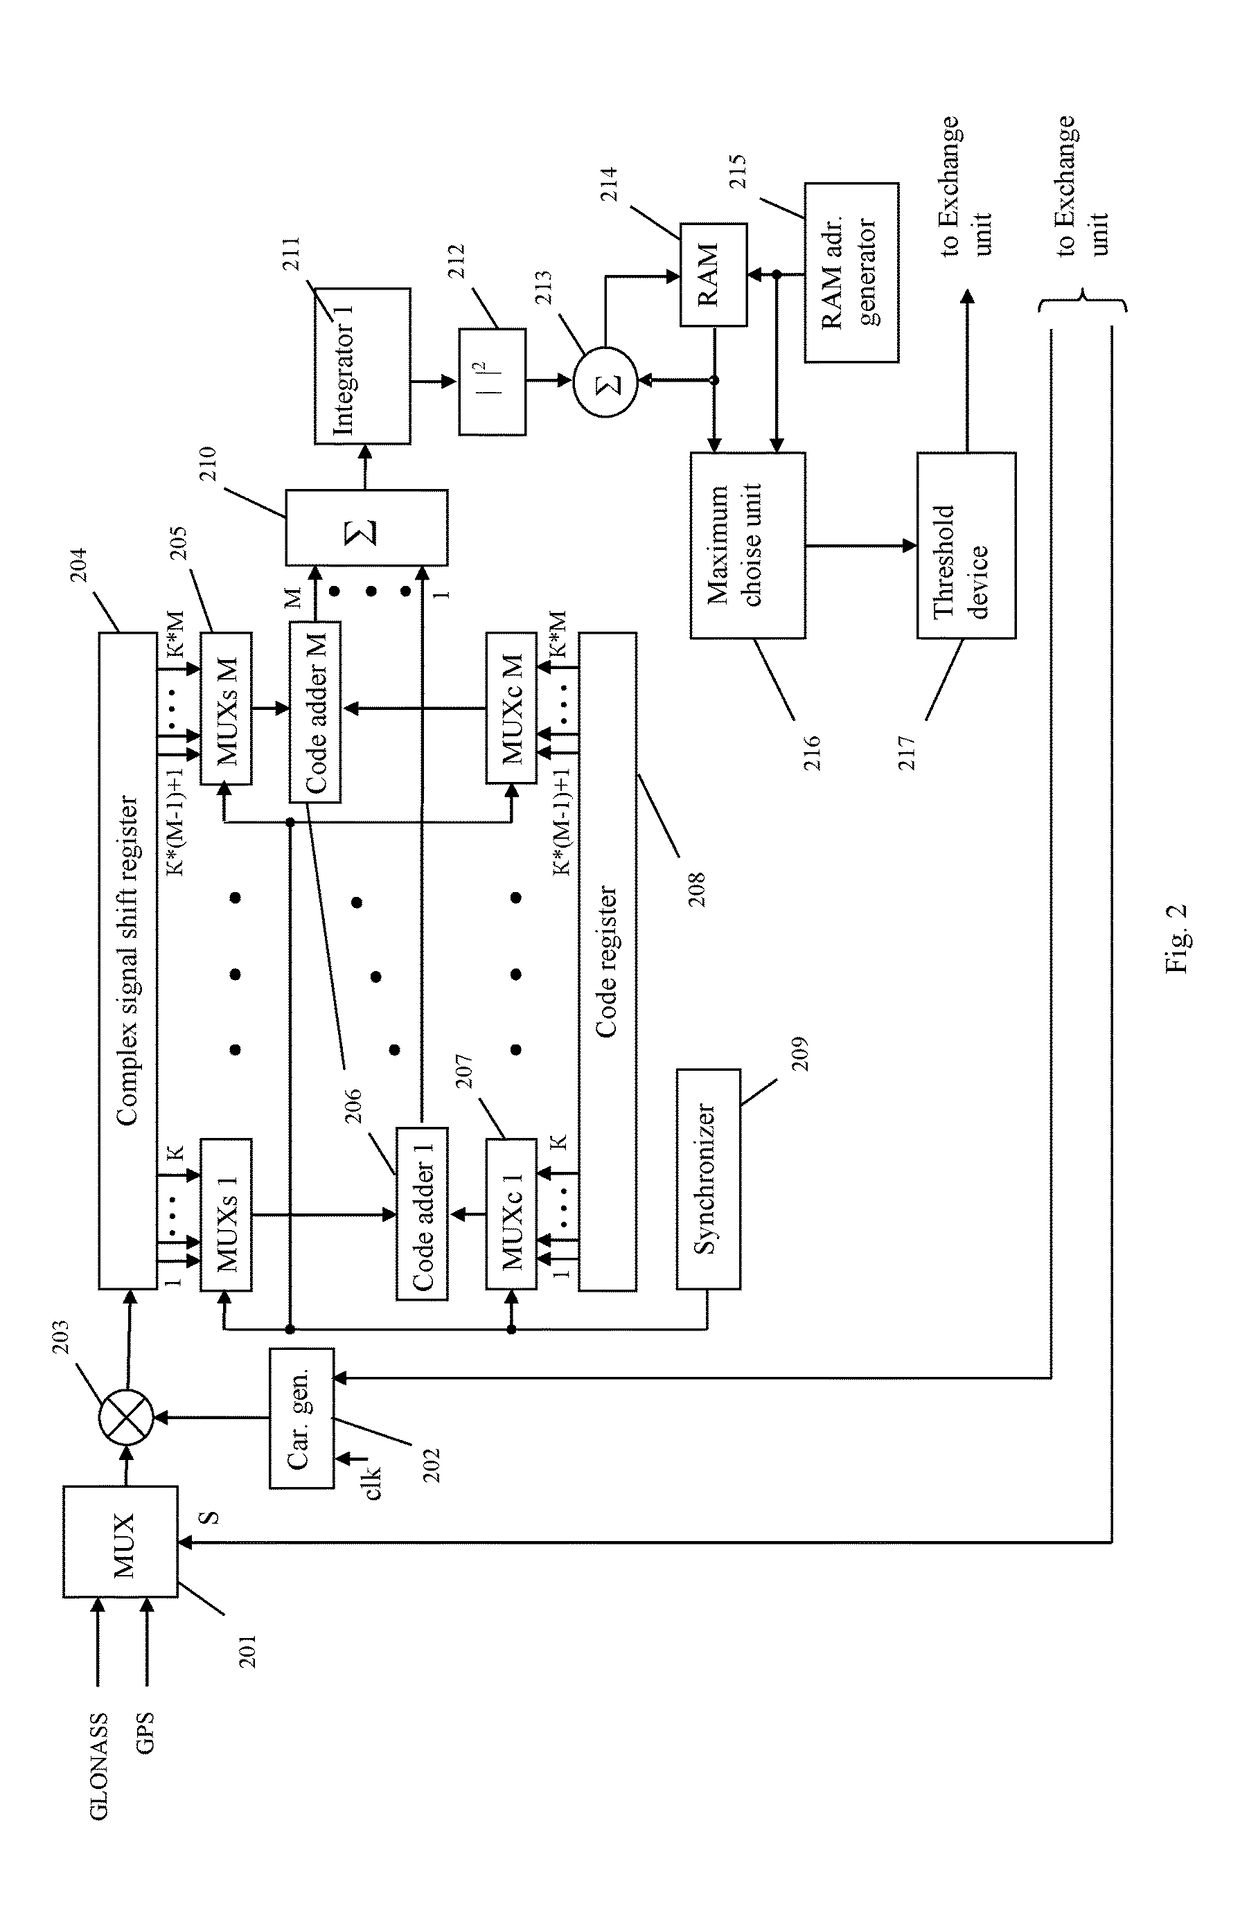 Simultaneous signal reception device of different satellite navigation systems